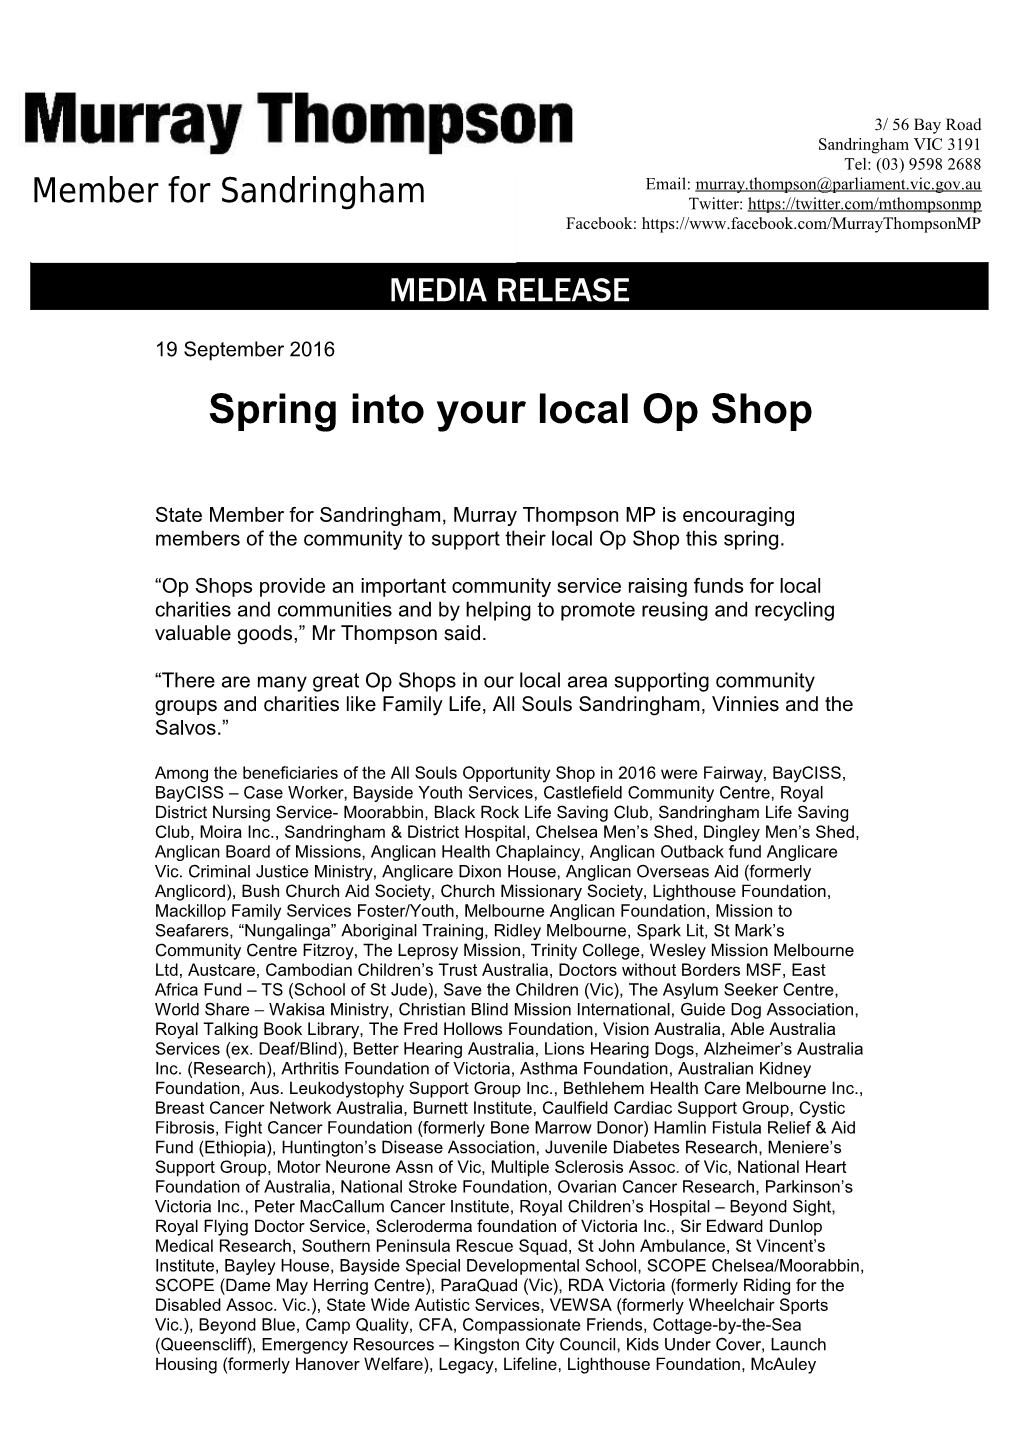 Spring Into Your Local Op Shop